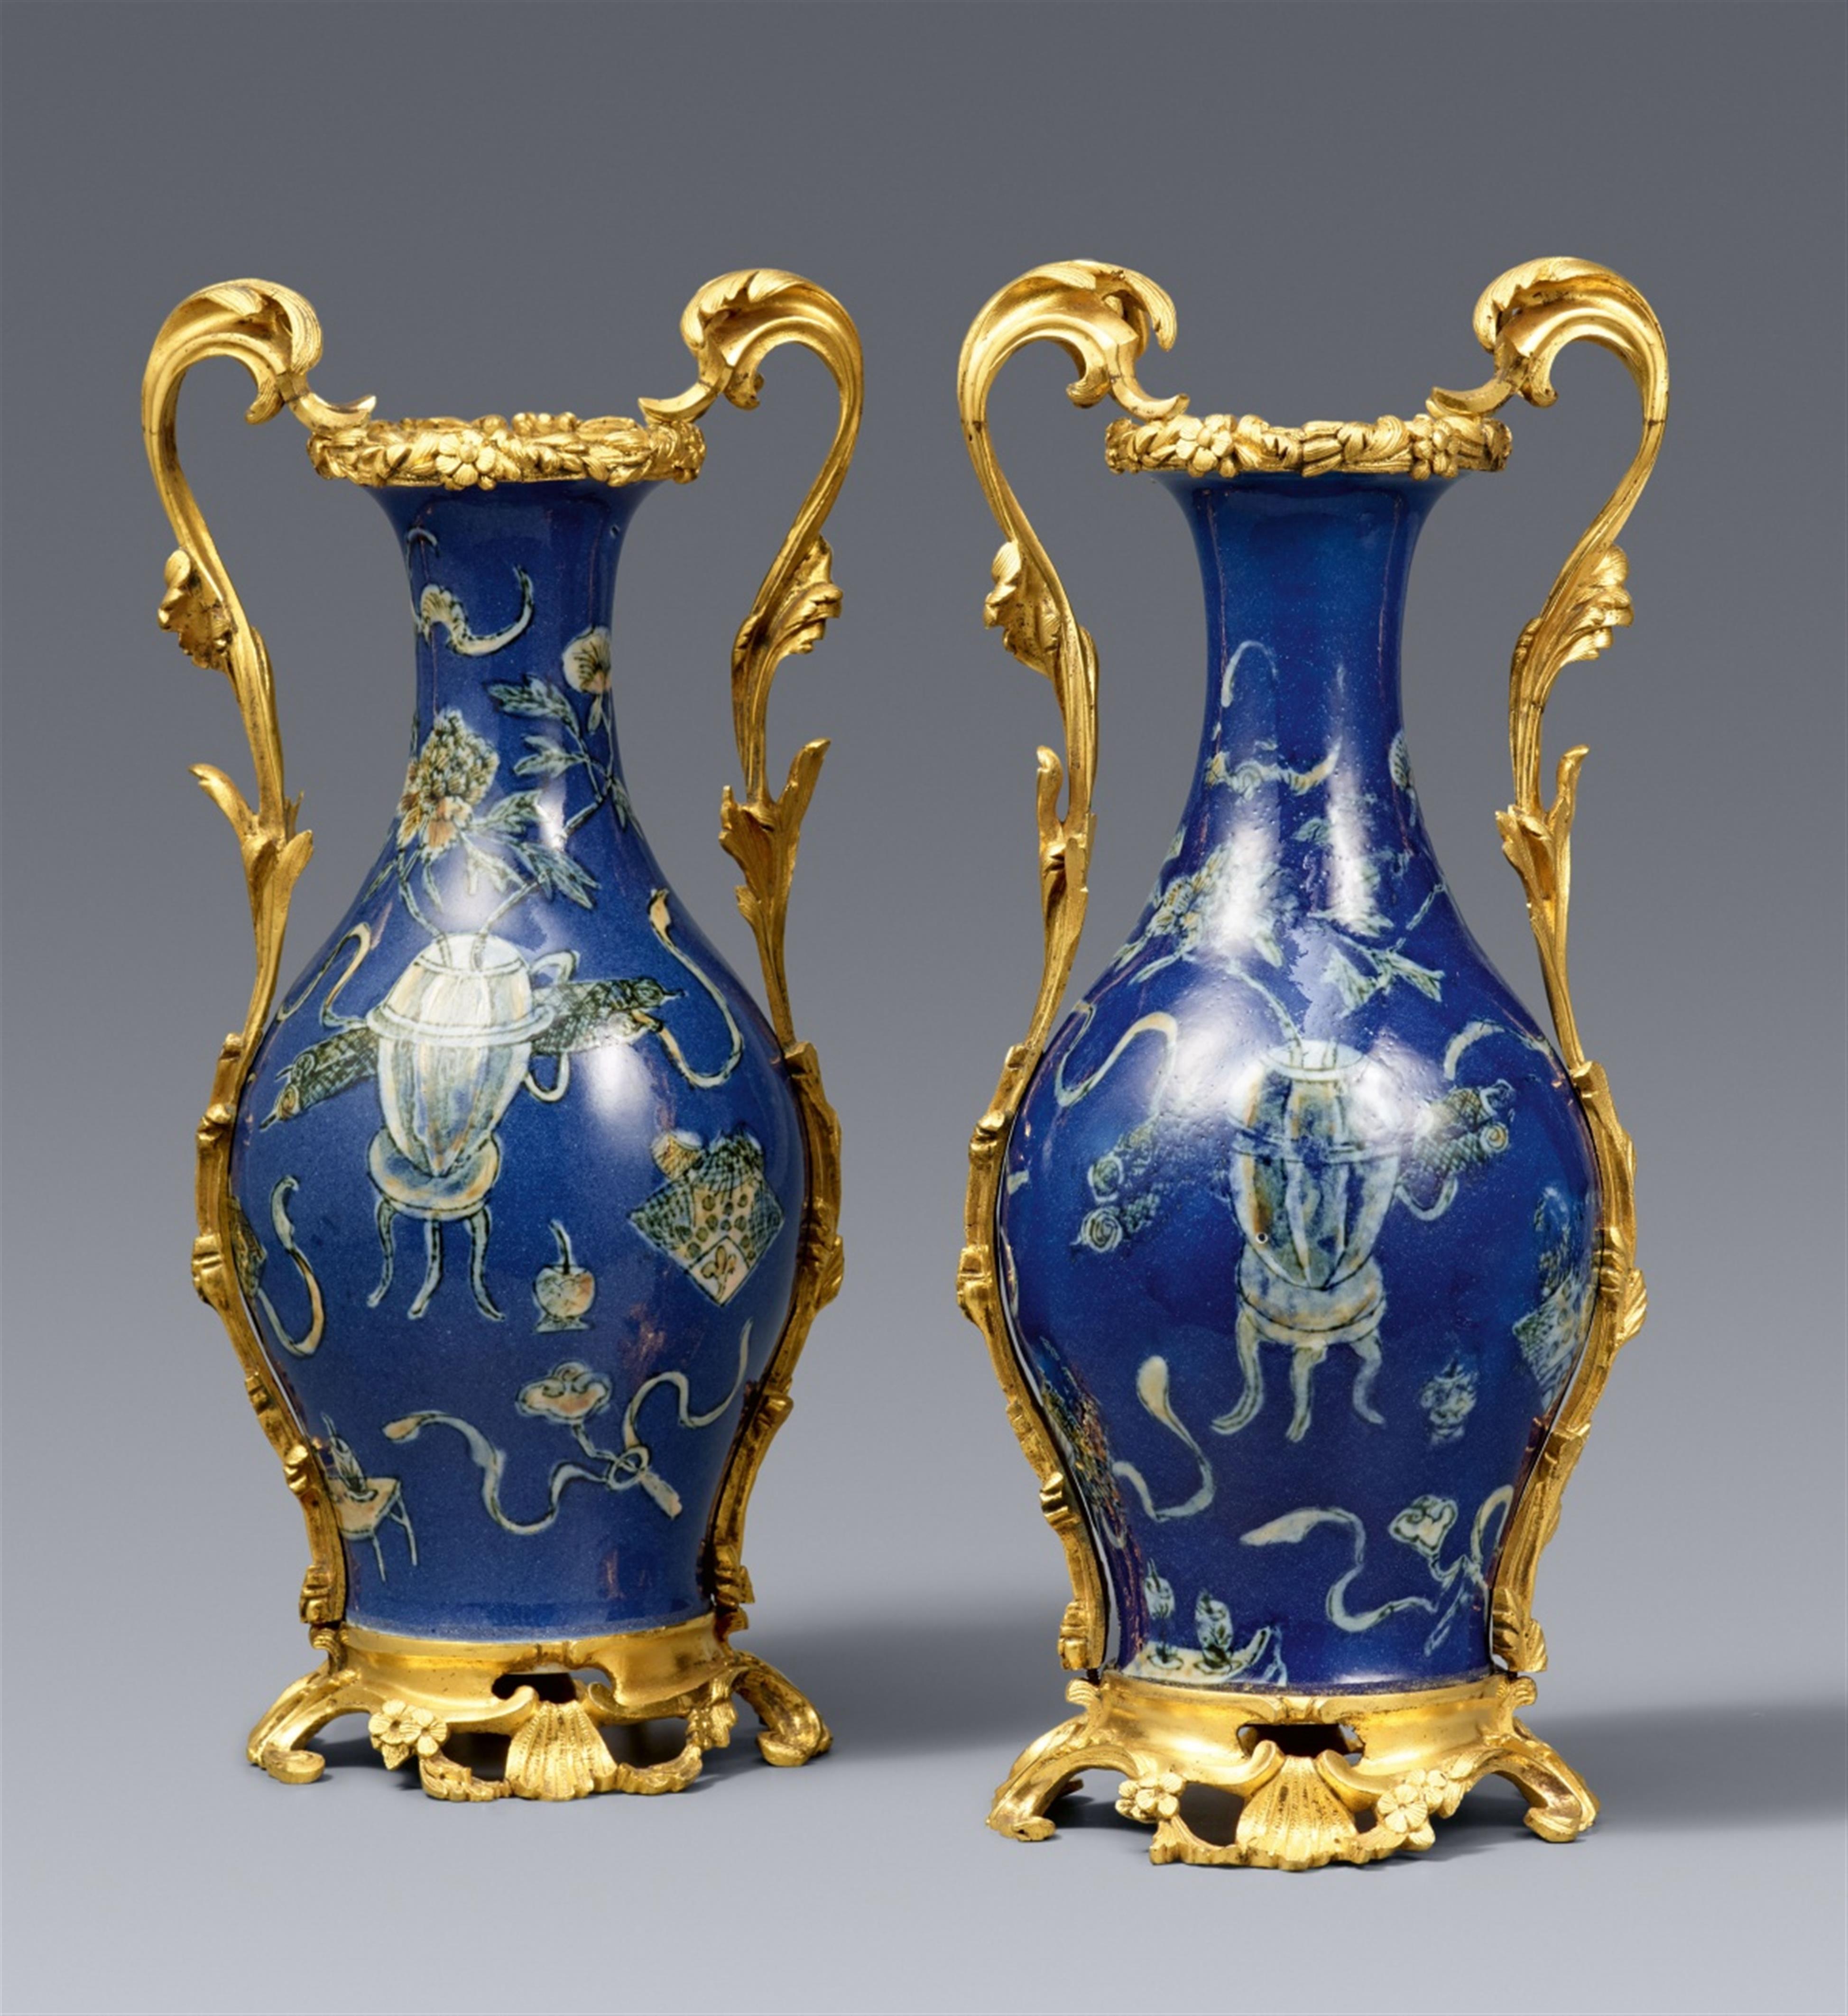 A pair of outstanding Louis XV ormolu-mounted powder-blue Chinese porcelain vases - image-1